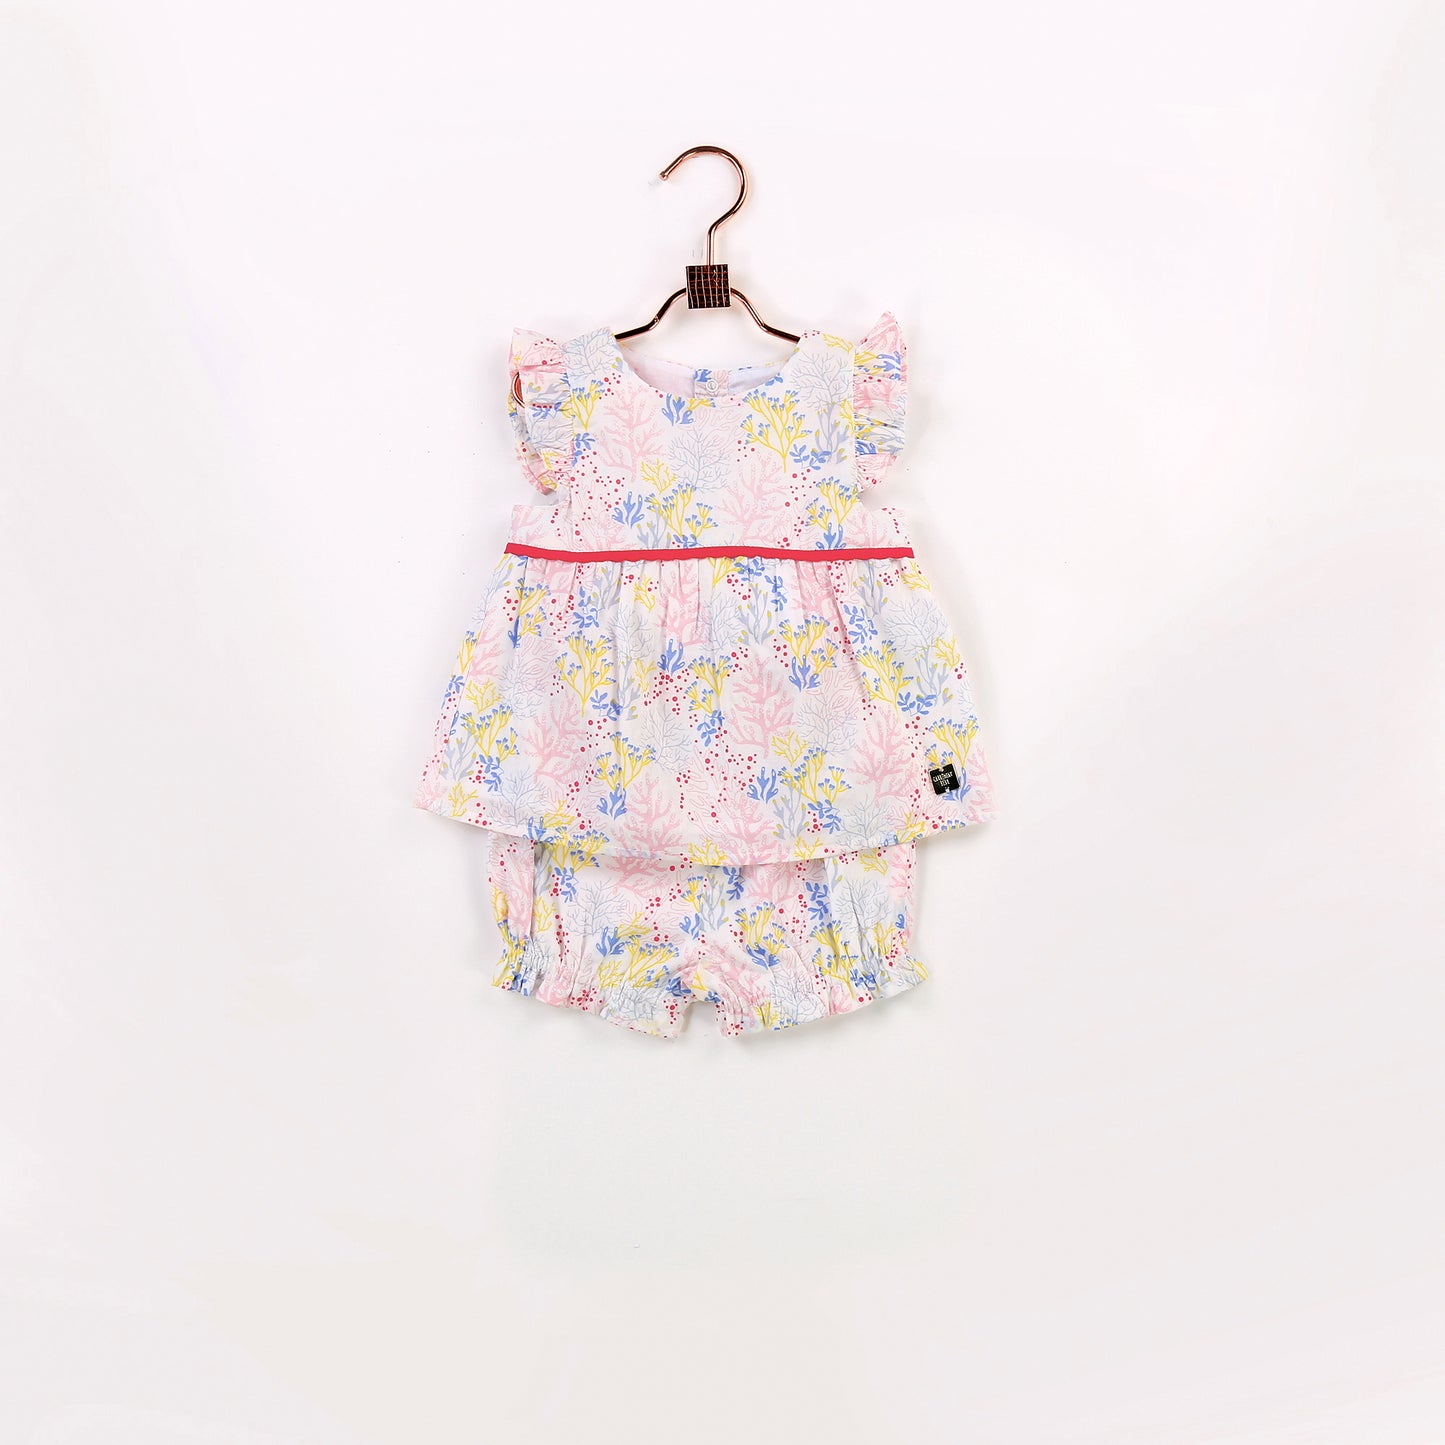 Carrément Beau Baby Girl's Floral Blouse & Bloomer Set